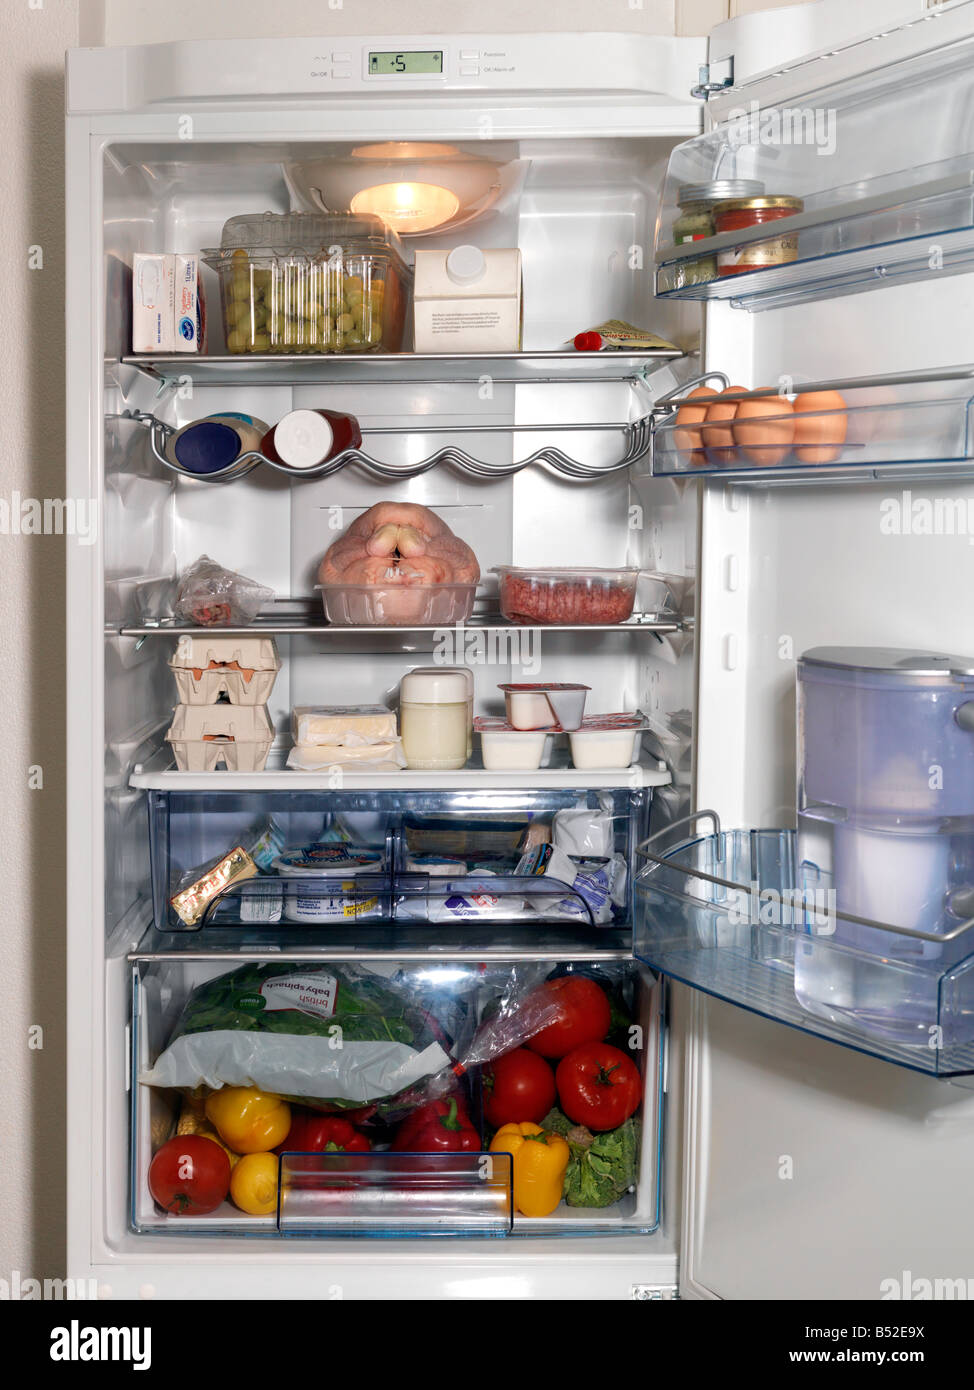 Interior of Fridge Showing Separate compartments for Produce Dairy and Meat Stock Photo